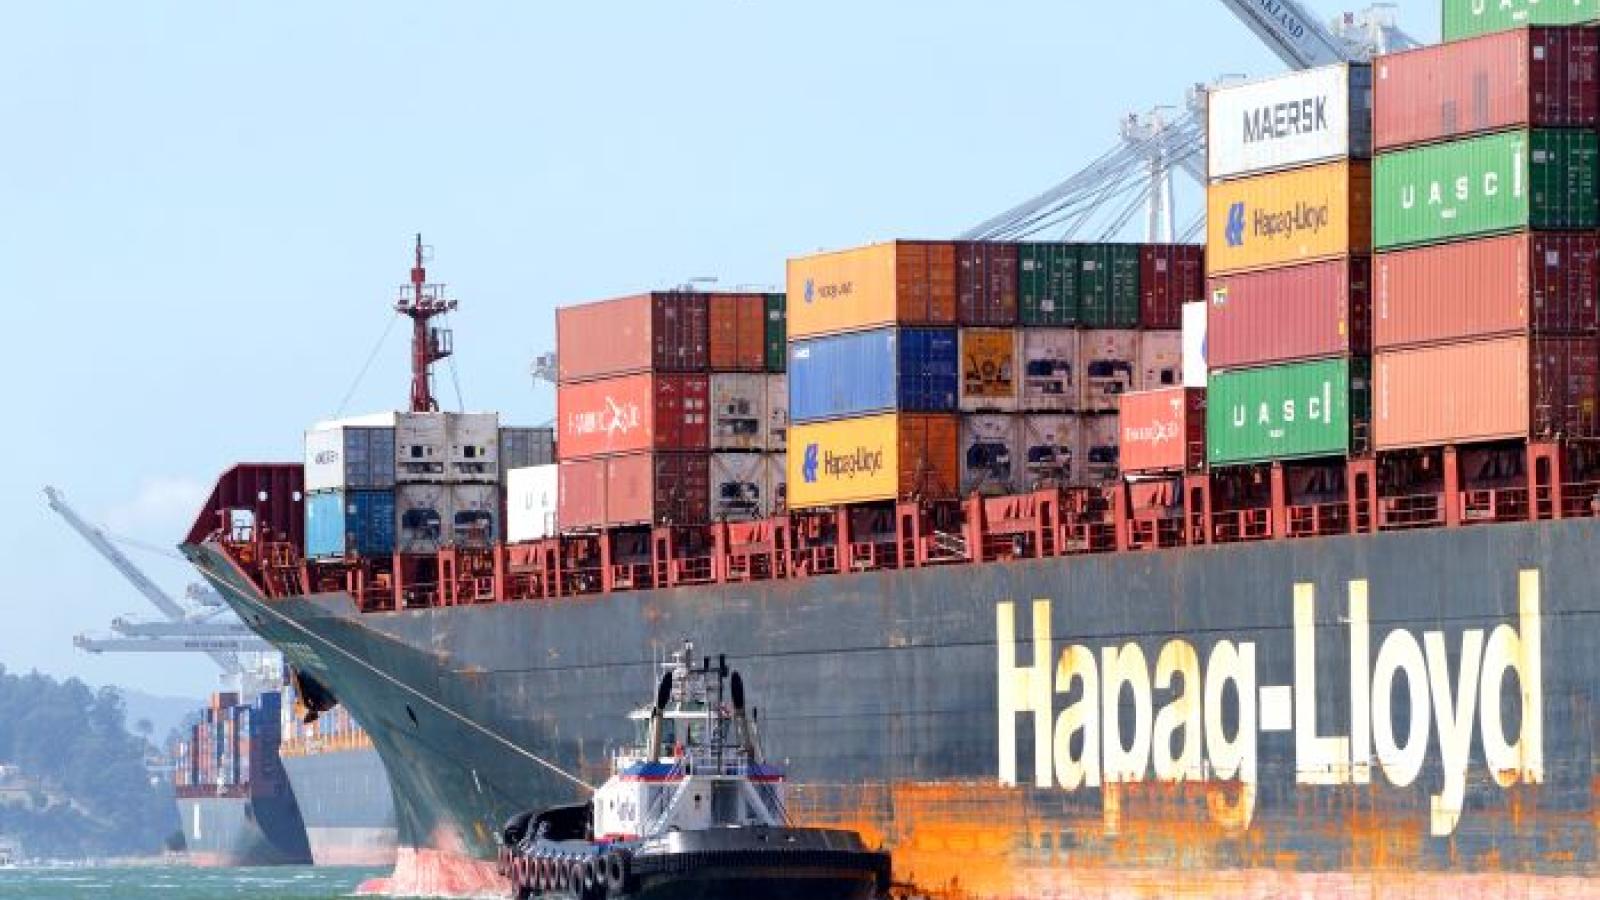 Container Shipping Has Cratered, as Ship Owners Try to Avoid